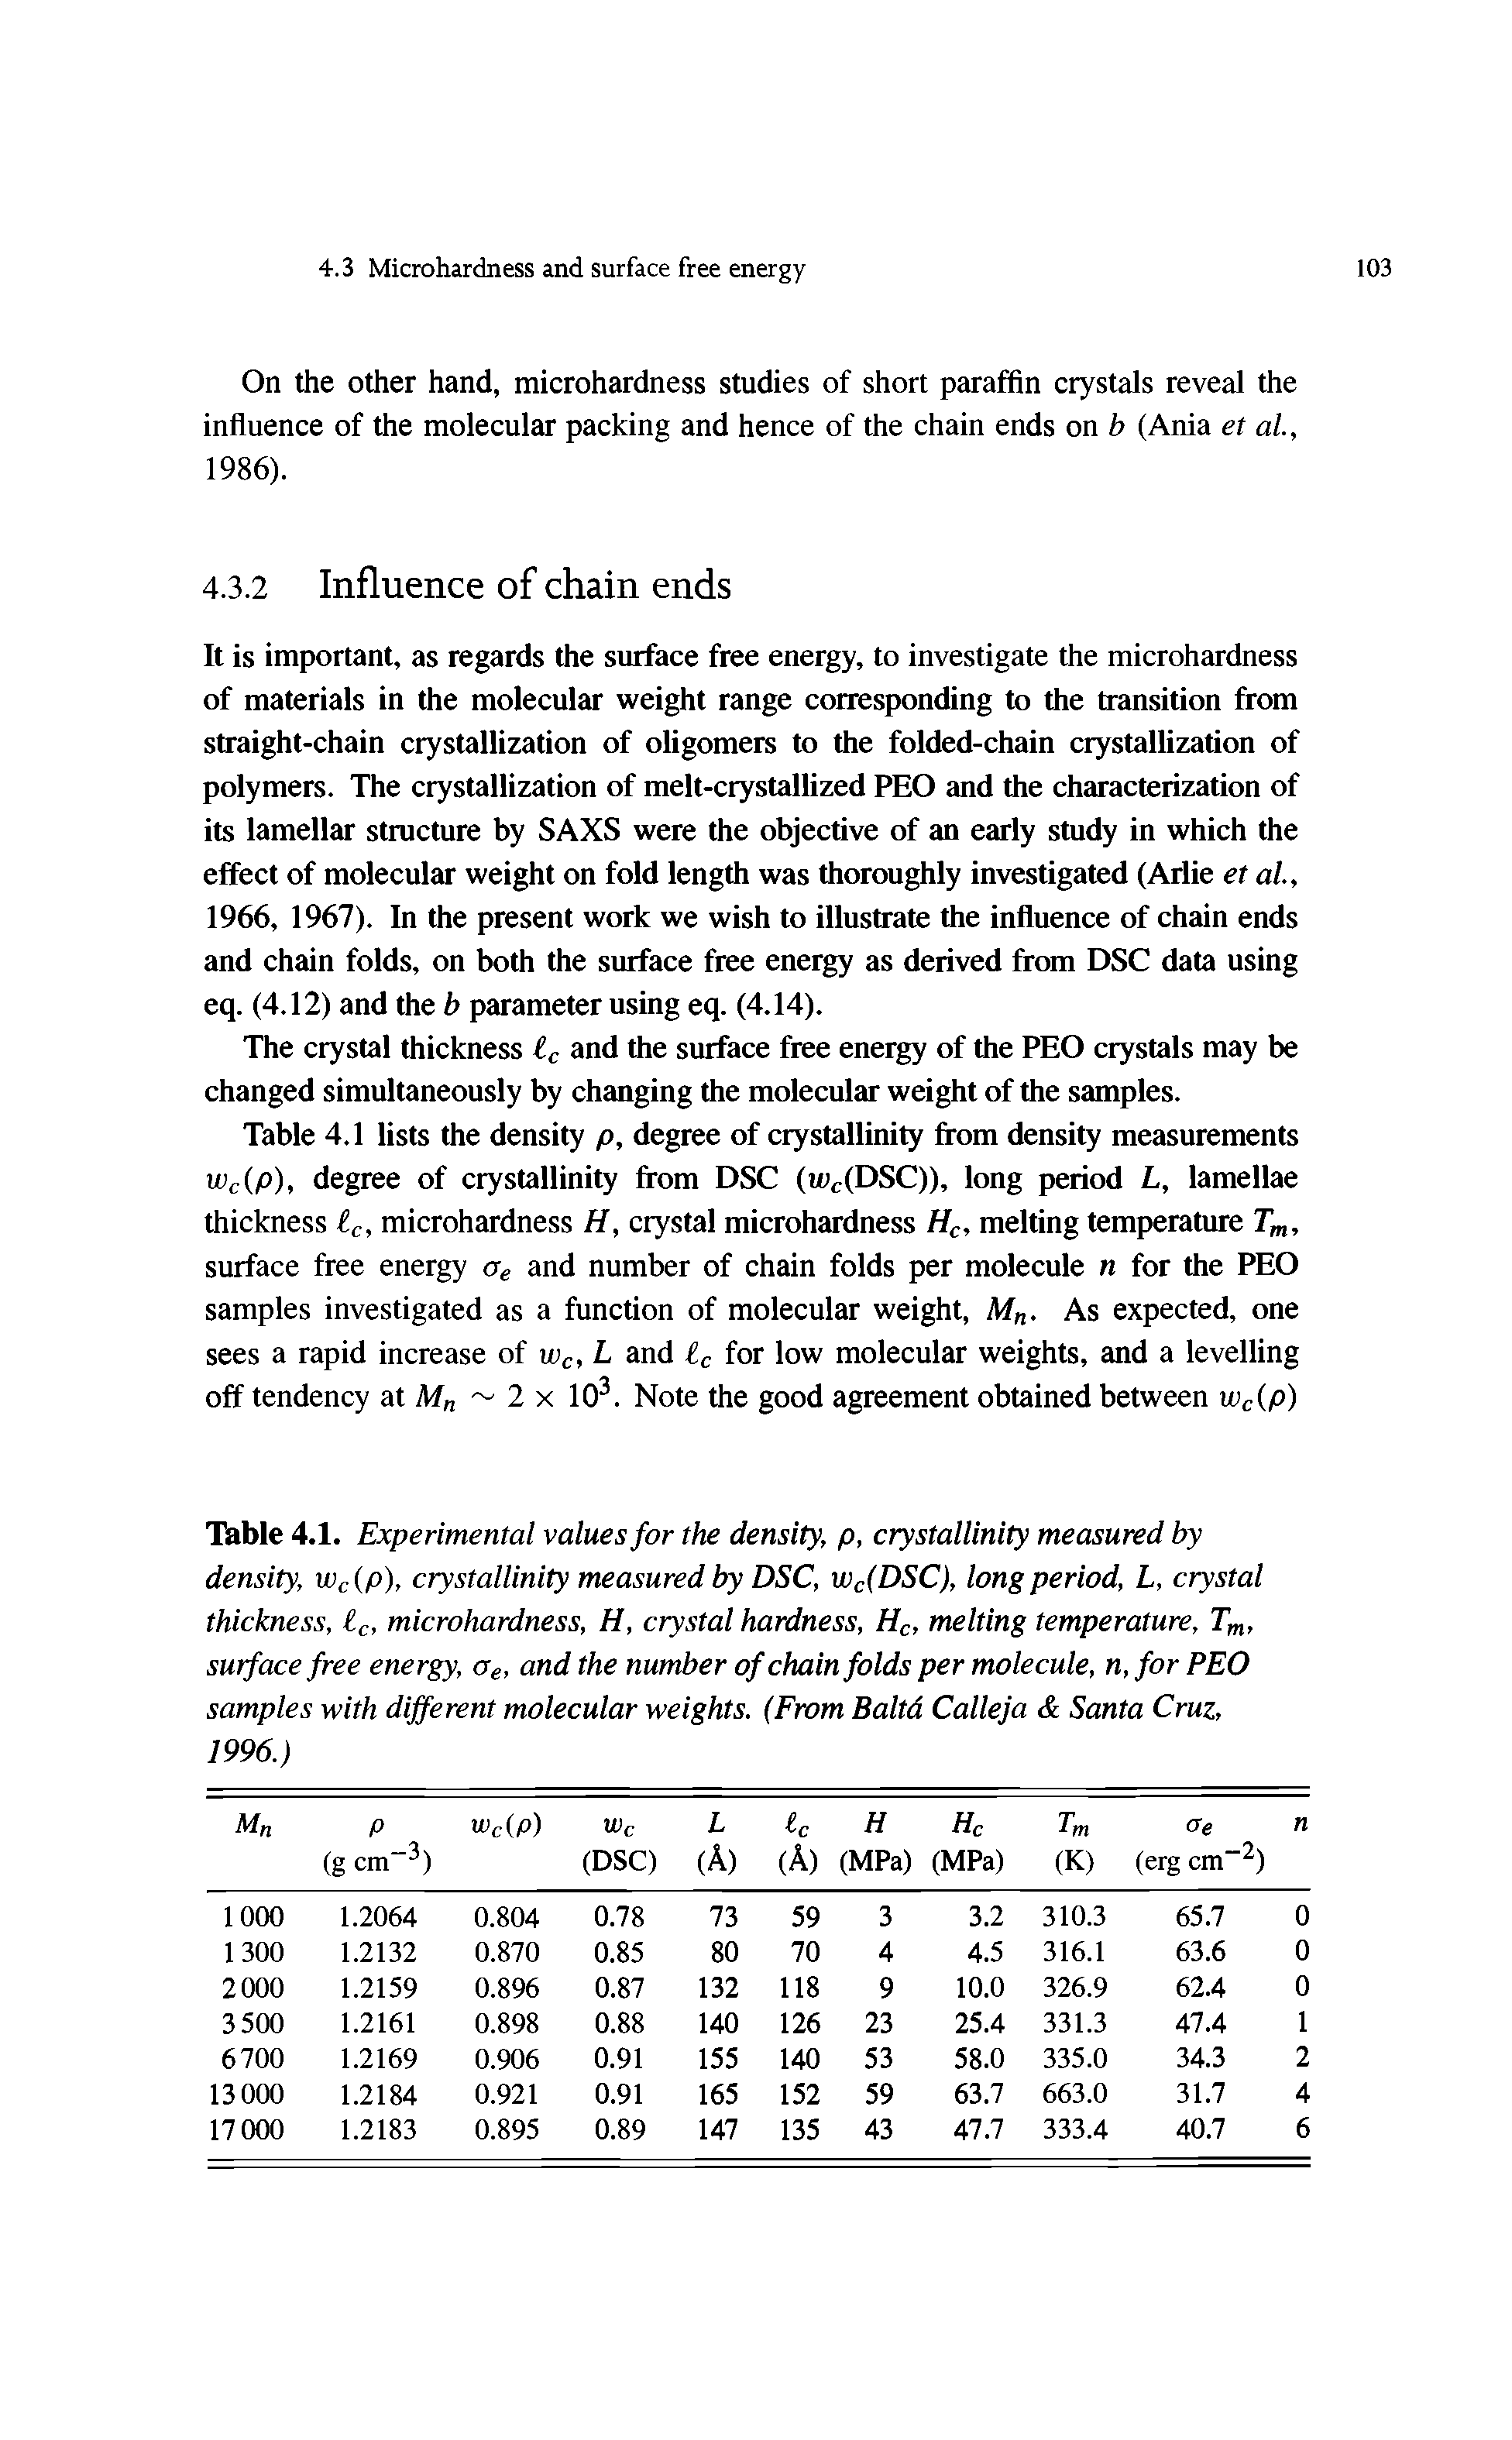 Table 4.1. Experimental values for the density, p, crystallinity measured by density, wdp), crystallinity measured by DSC, Wc(DSC), long period, L, crystal thickness, Ic, microhardness, H, crystal hardness. He, melting temperature, T, surface free energy, Oe, and the number of chain folds per molecule, n, for PEO samples with different molecular weights. (From Baltd Calleja Santa Cruz, 1996.)...